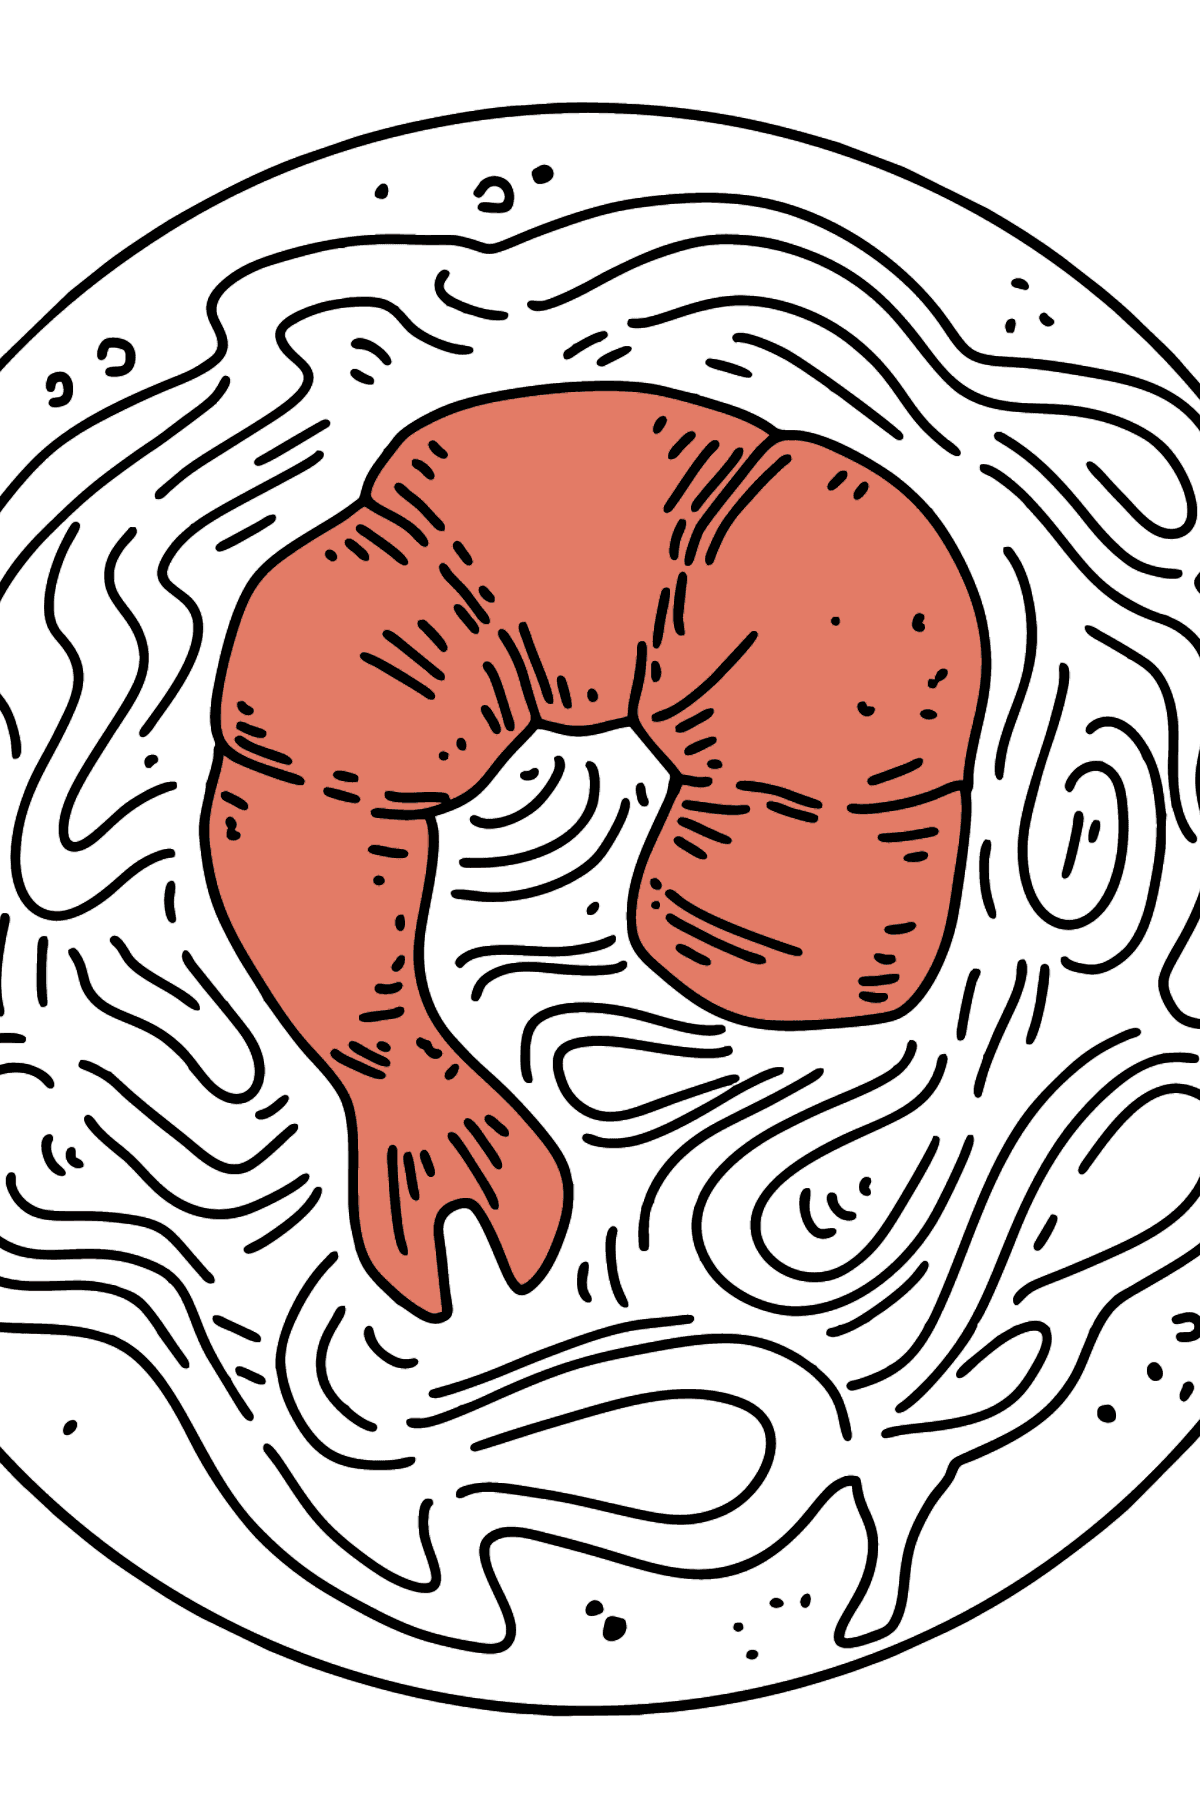 Spaghetti with Shrimps coloring page - Coloring Pages for Kids